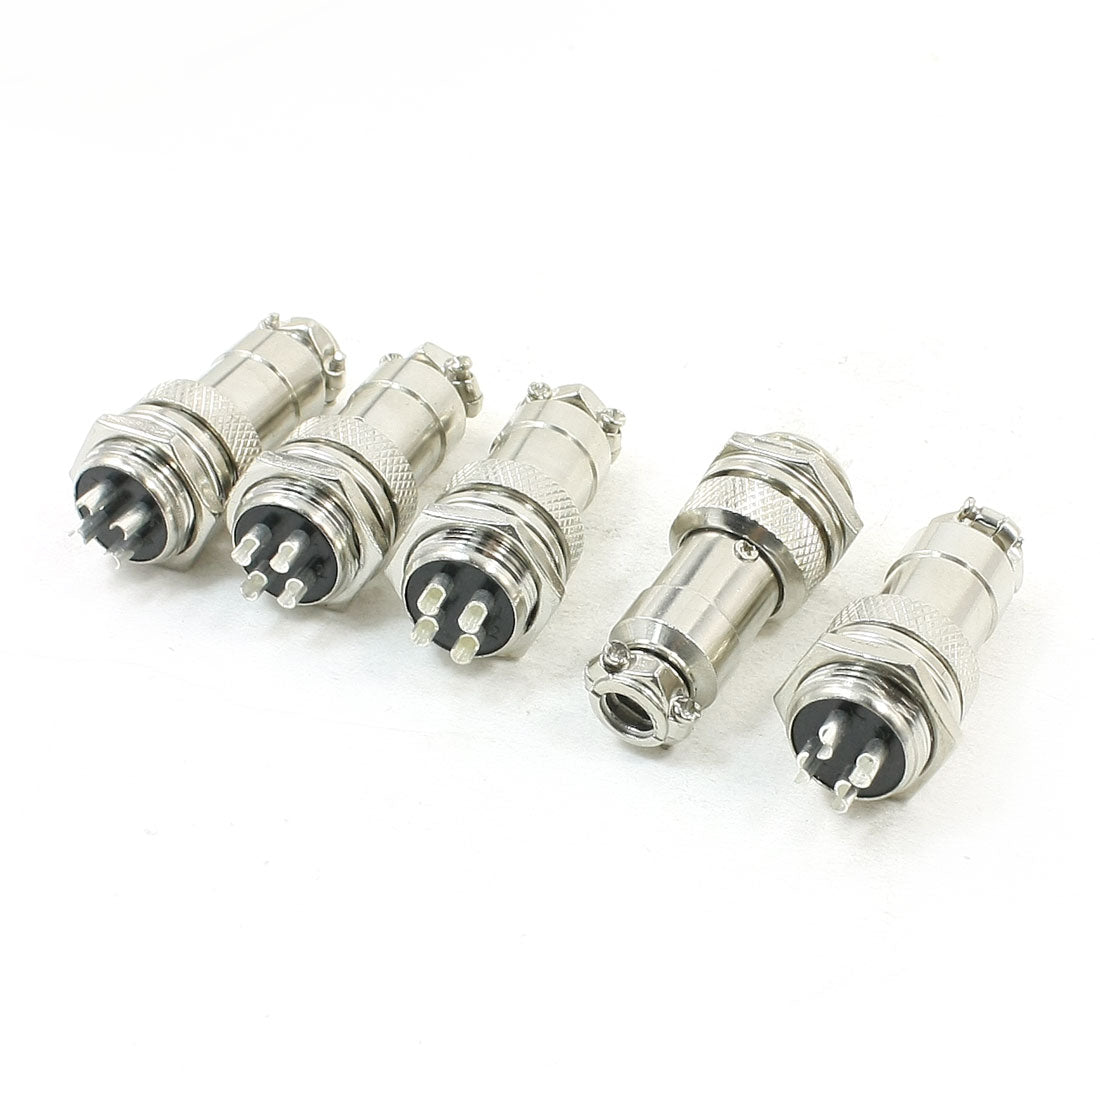 uxcell Uxcell 5Pcs AC400V 5A 4 Pins 16mm Thread Aviation Circular Male Connector